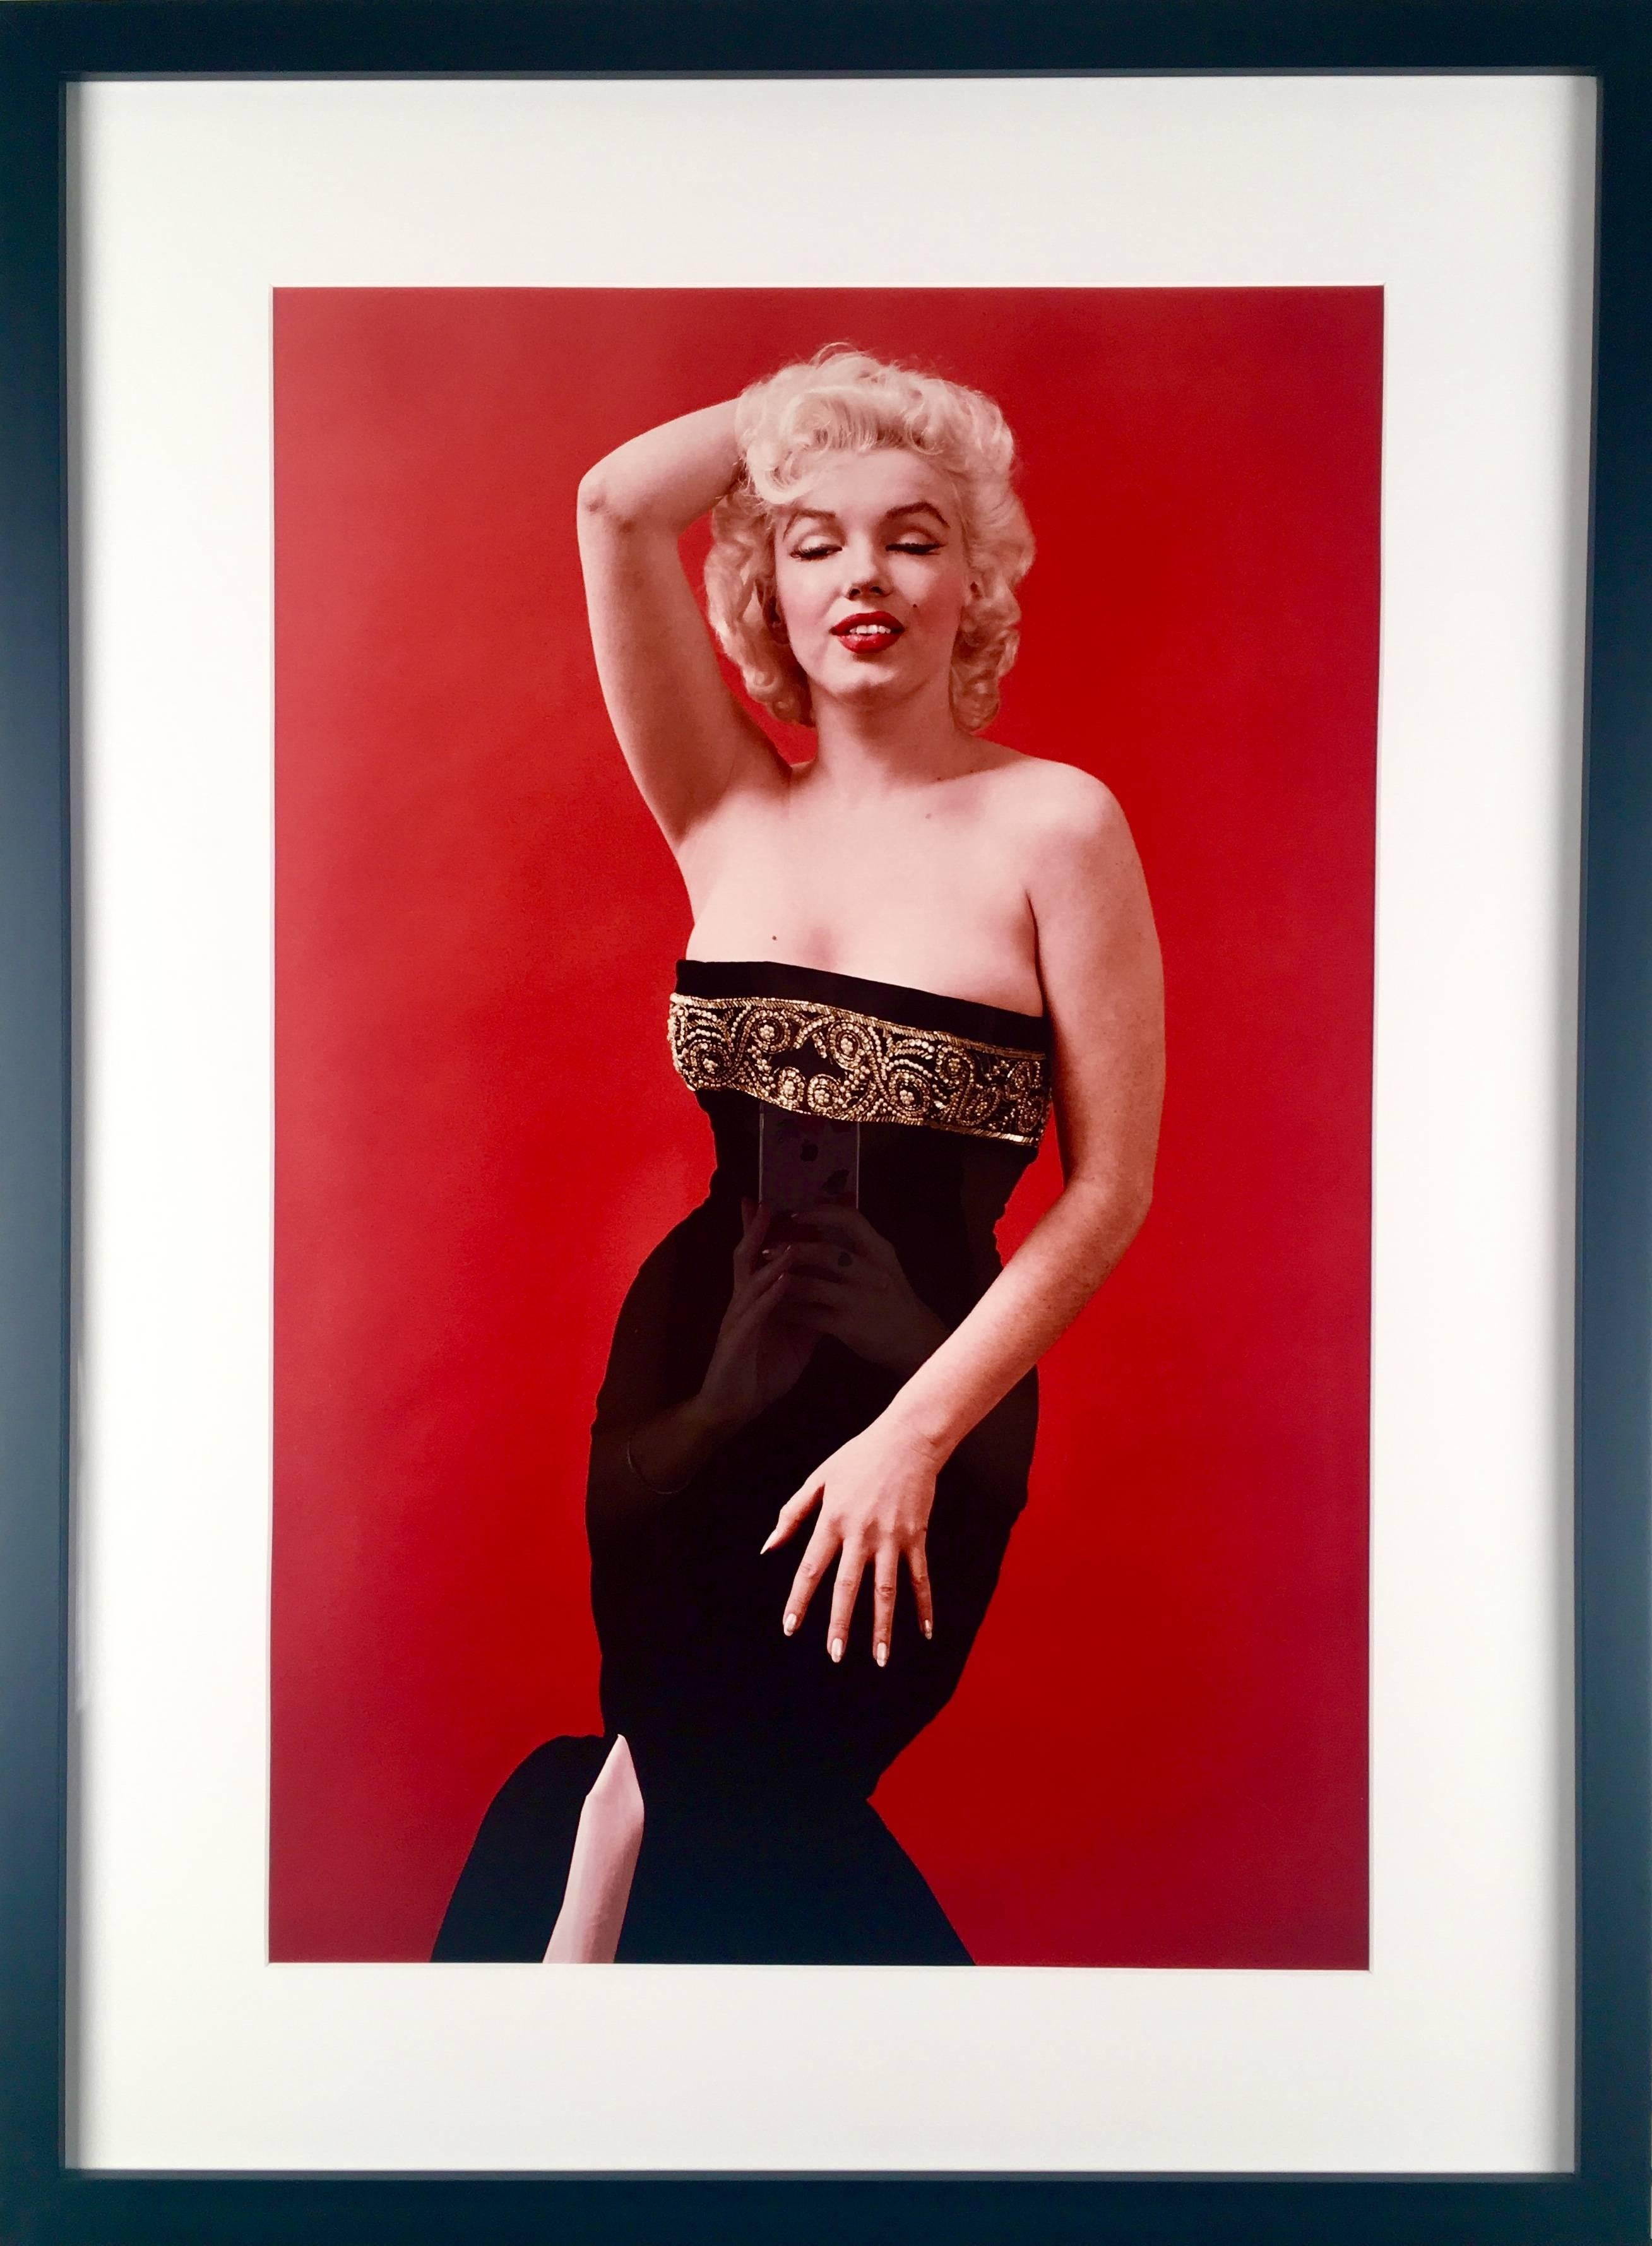 This piece is a pigment print from the original negative, shot by Milton Greene in 1955. This photograph of Marilyn Monroe is from a photoshoot which became known as 